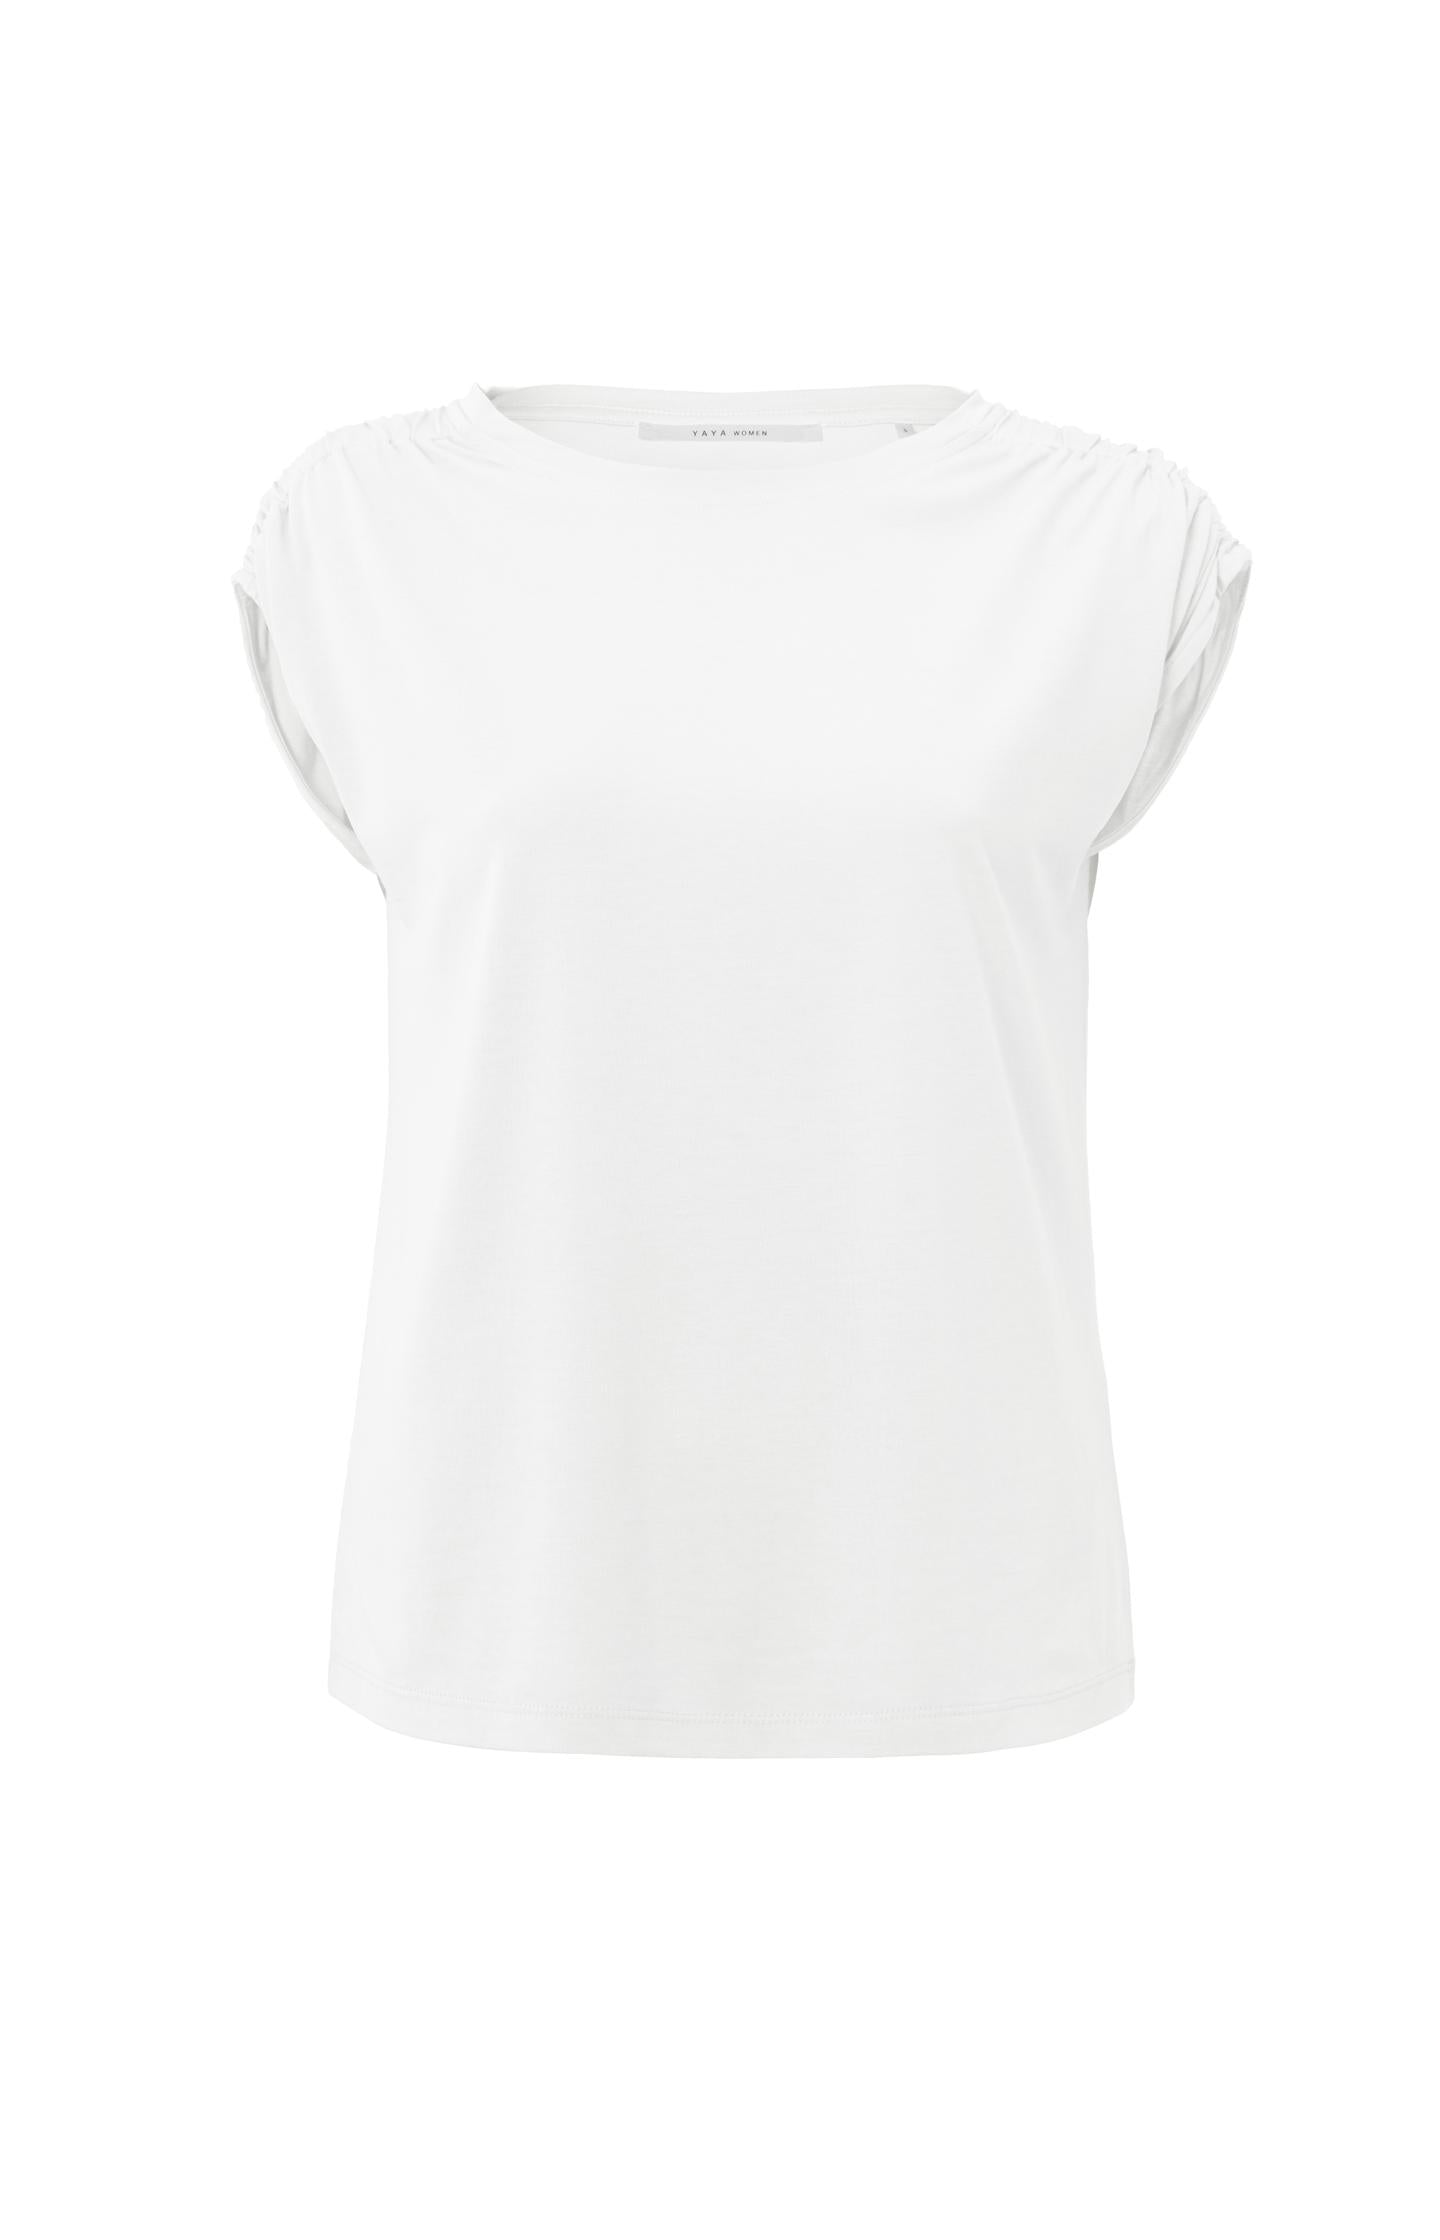 Top with boatneck, cap sleeves and shoulder details - Type: product